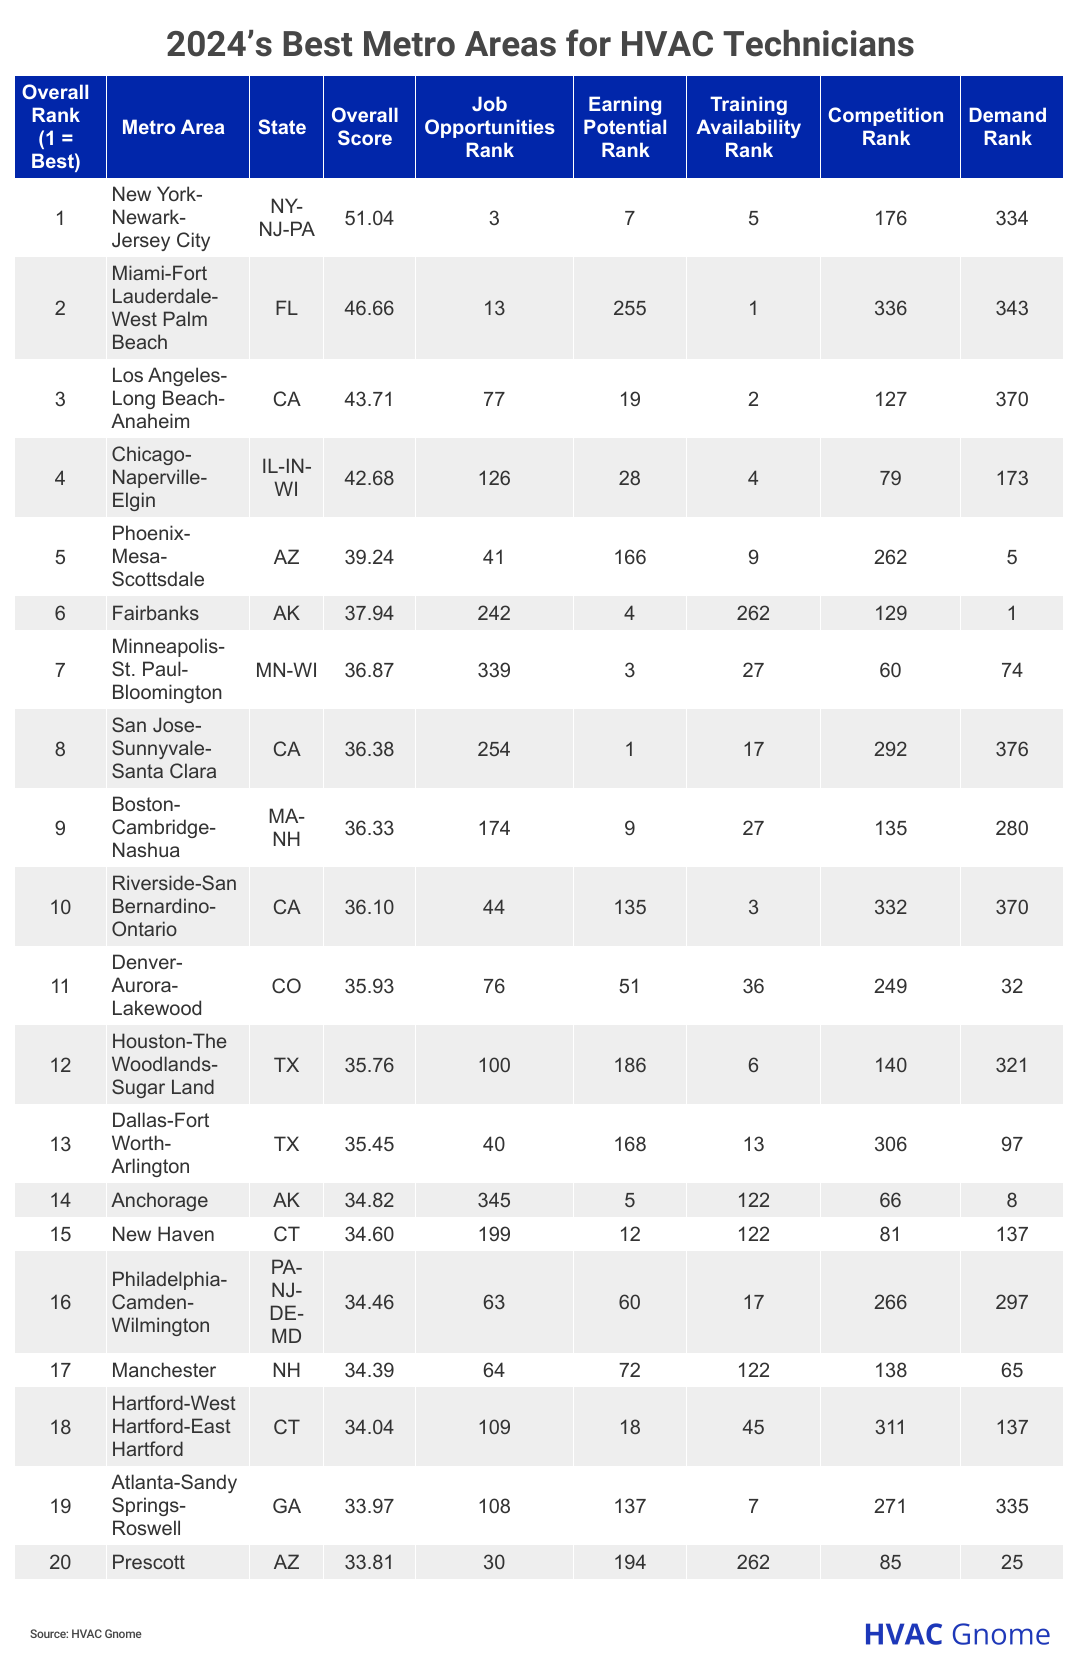 table showing top 20 best metro areas for HVAC technicians